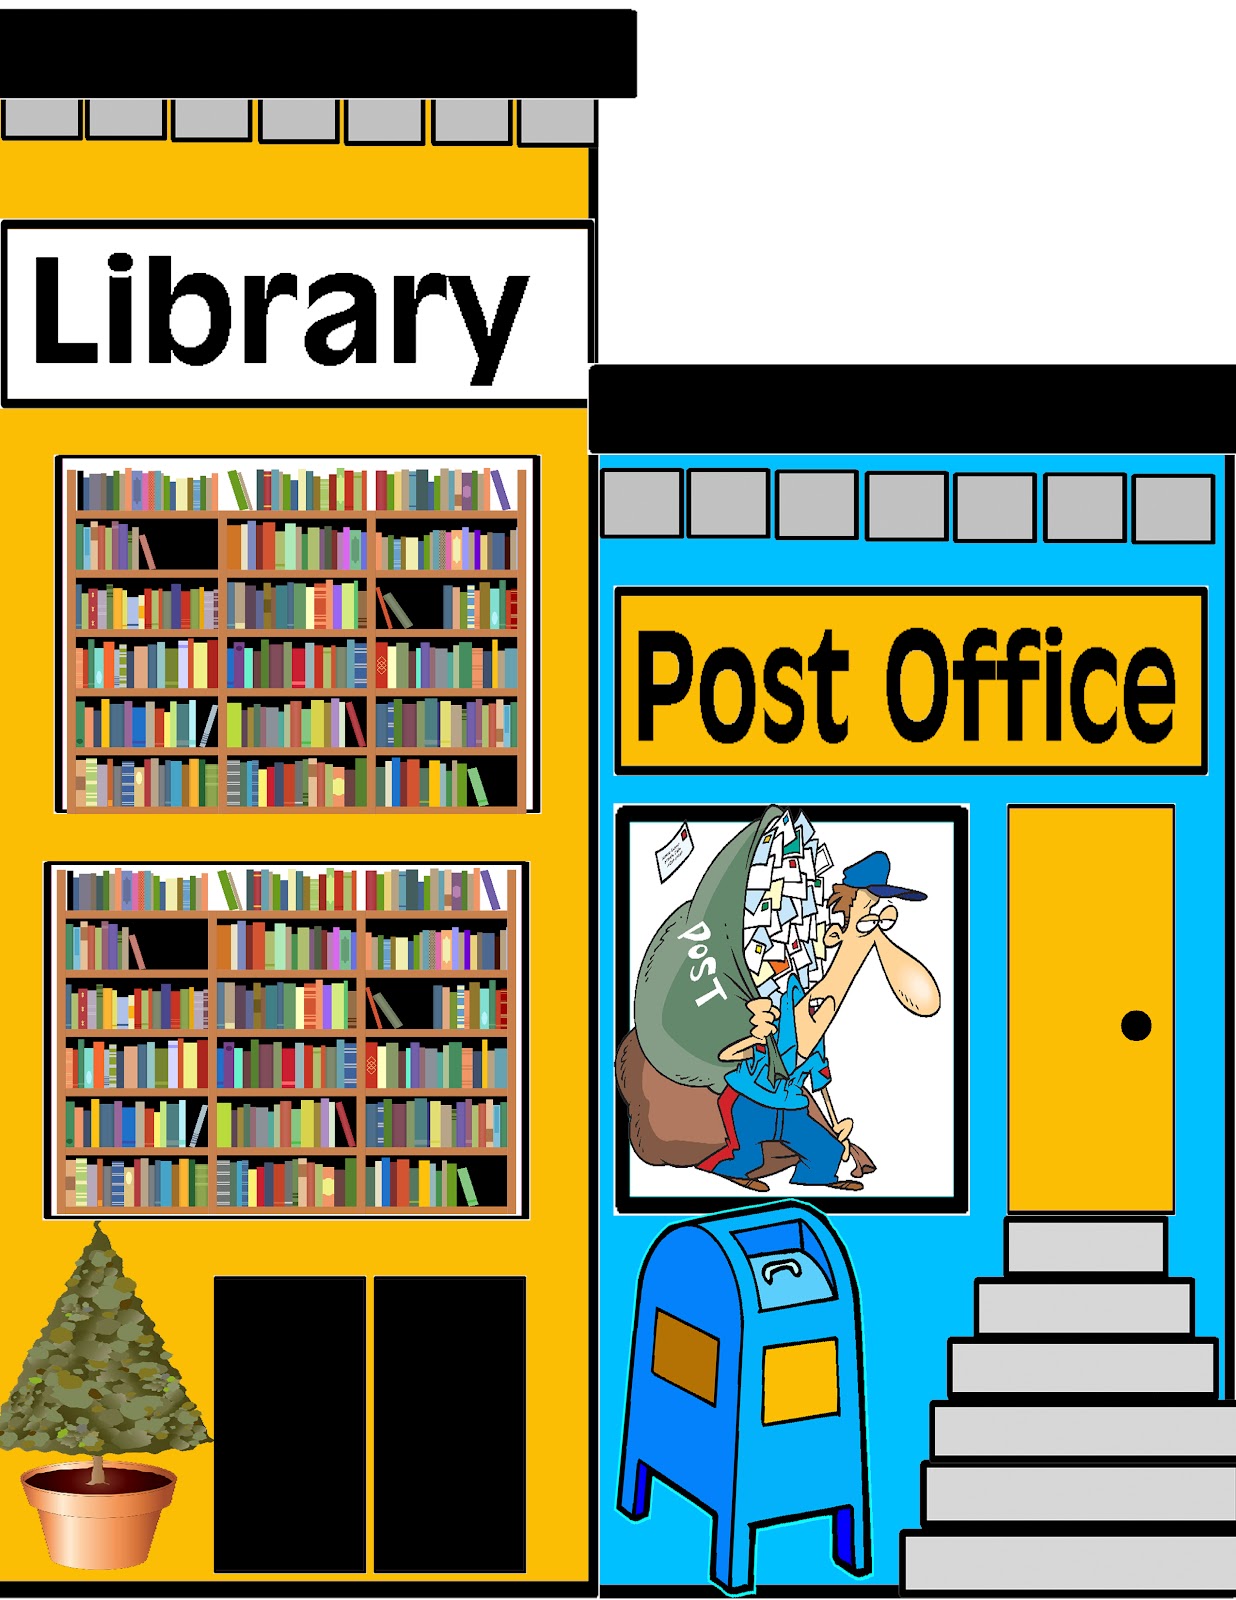 free clipart library building - photo #4